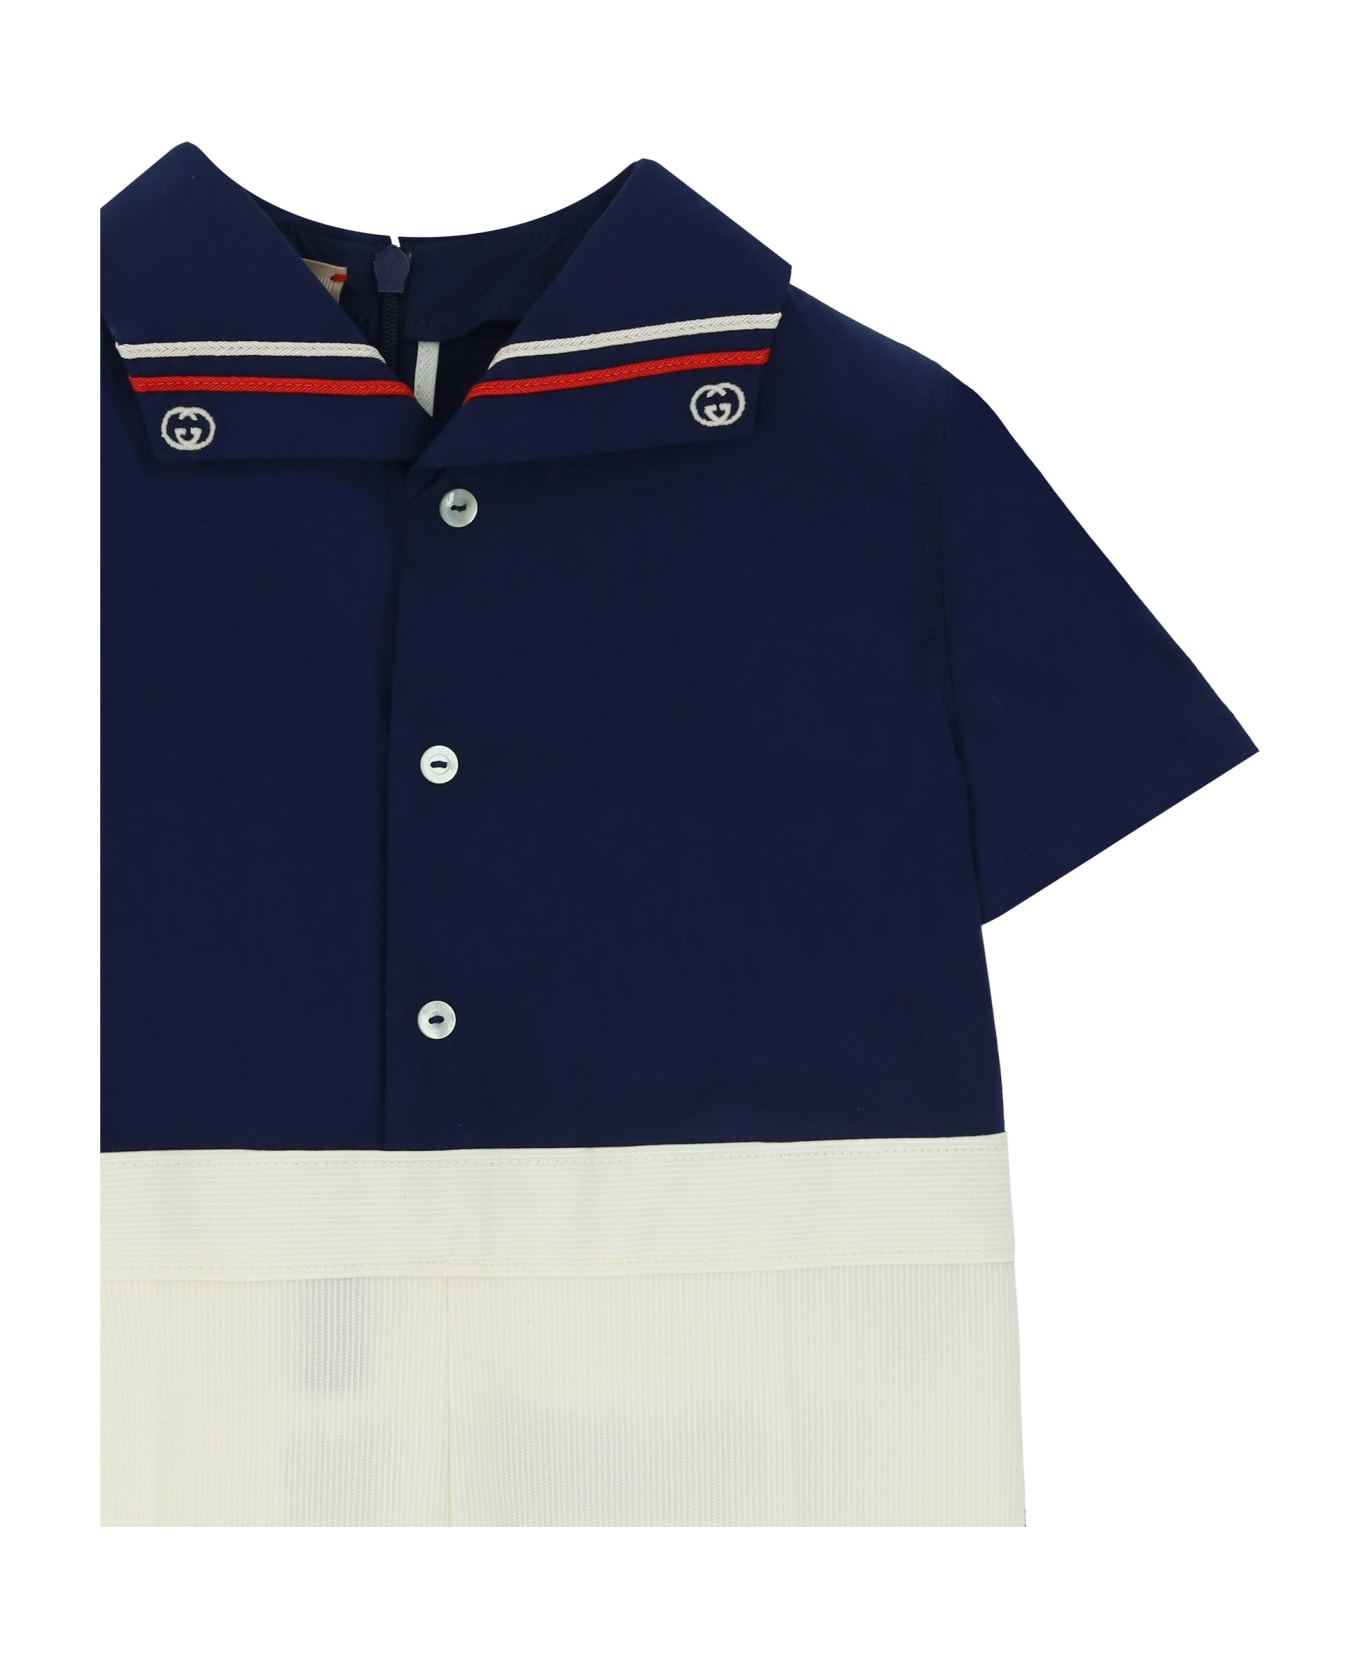 Gucci Baby suit - Urban Blue